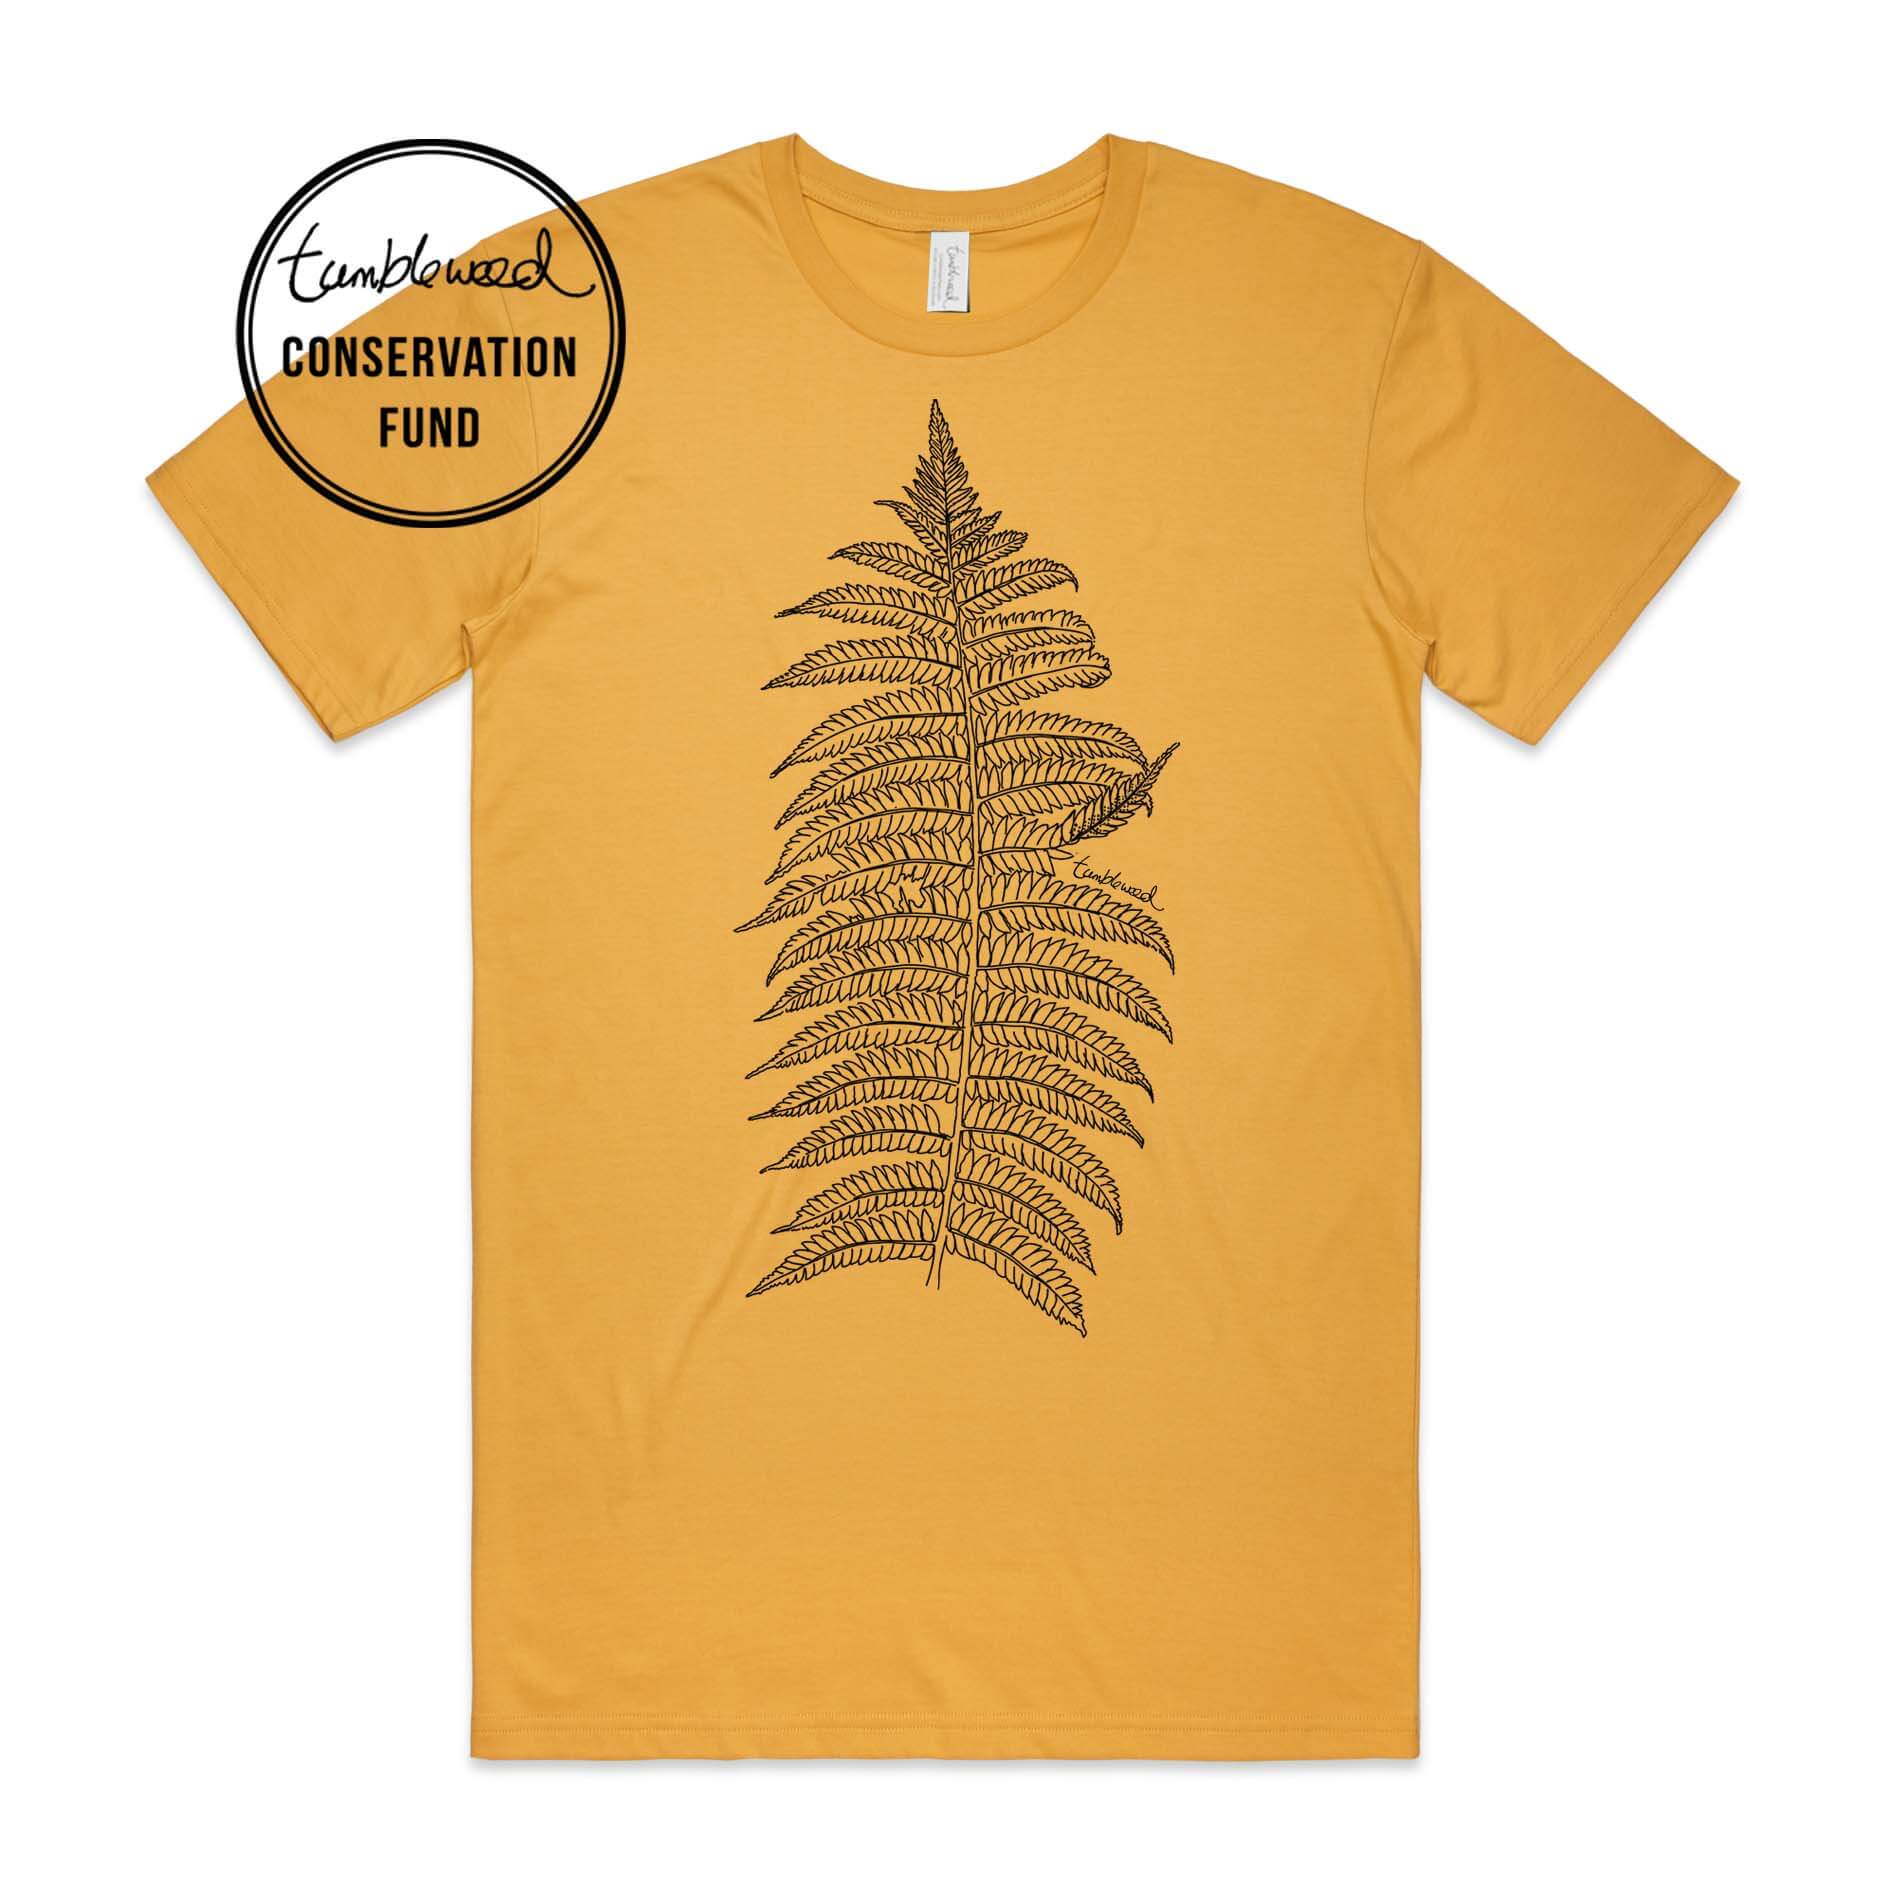 Charcoal, male t-shirt featuring a screen printed Silver fern/ponga design.